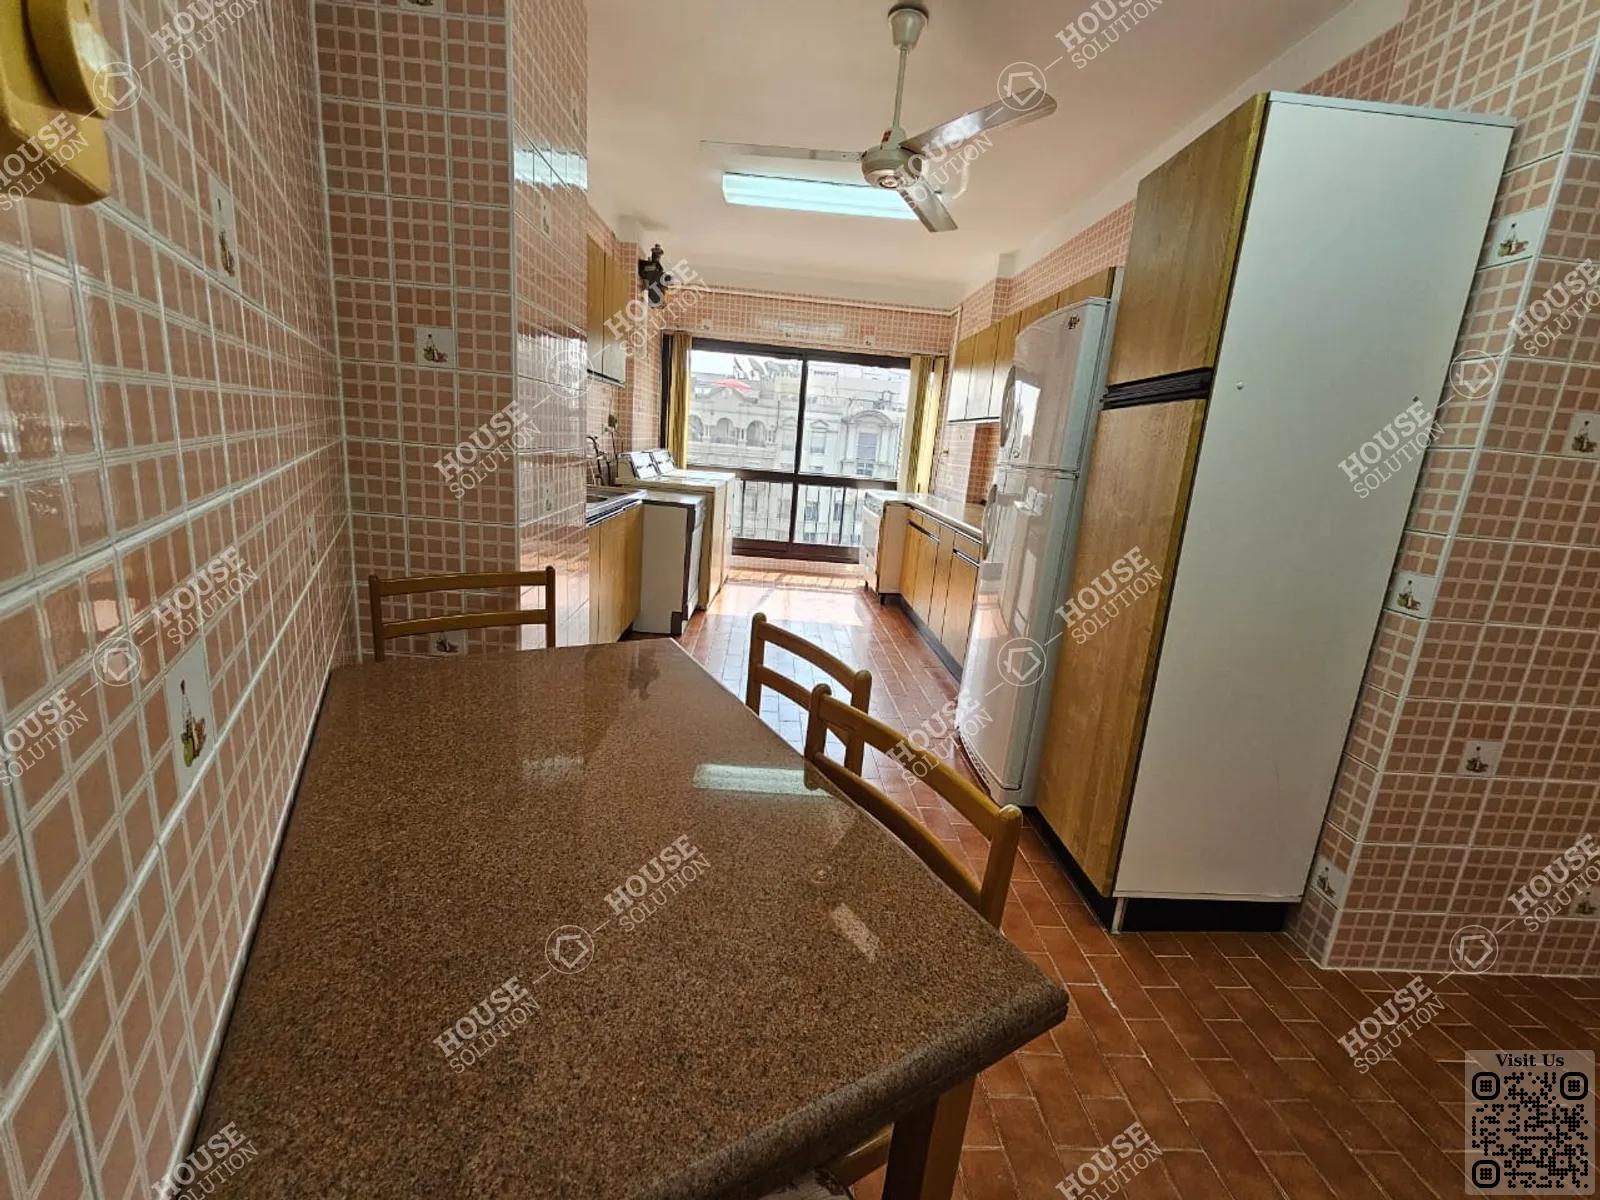 KITCHEN  @ Apartments For Rent In Maadi Maadi Sarayat Area: 220 m² consists of 3 Bedrooms 3 Bathrooms Furnished 5 stars #5824-2